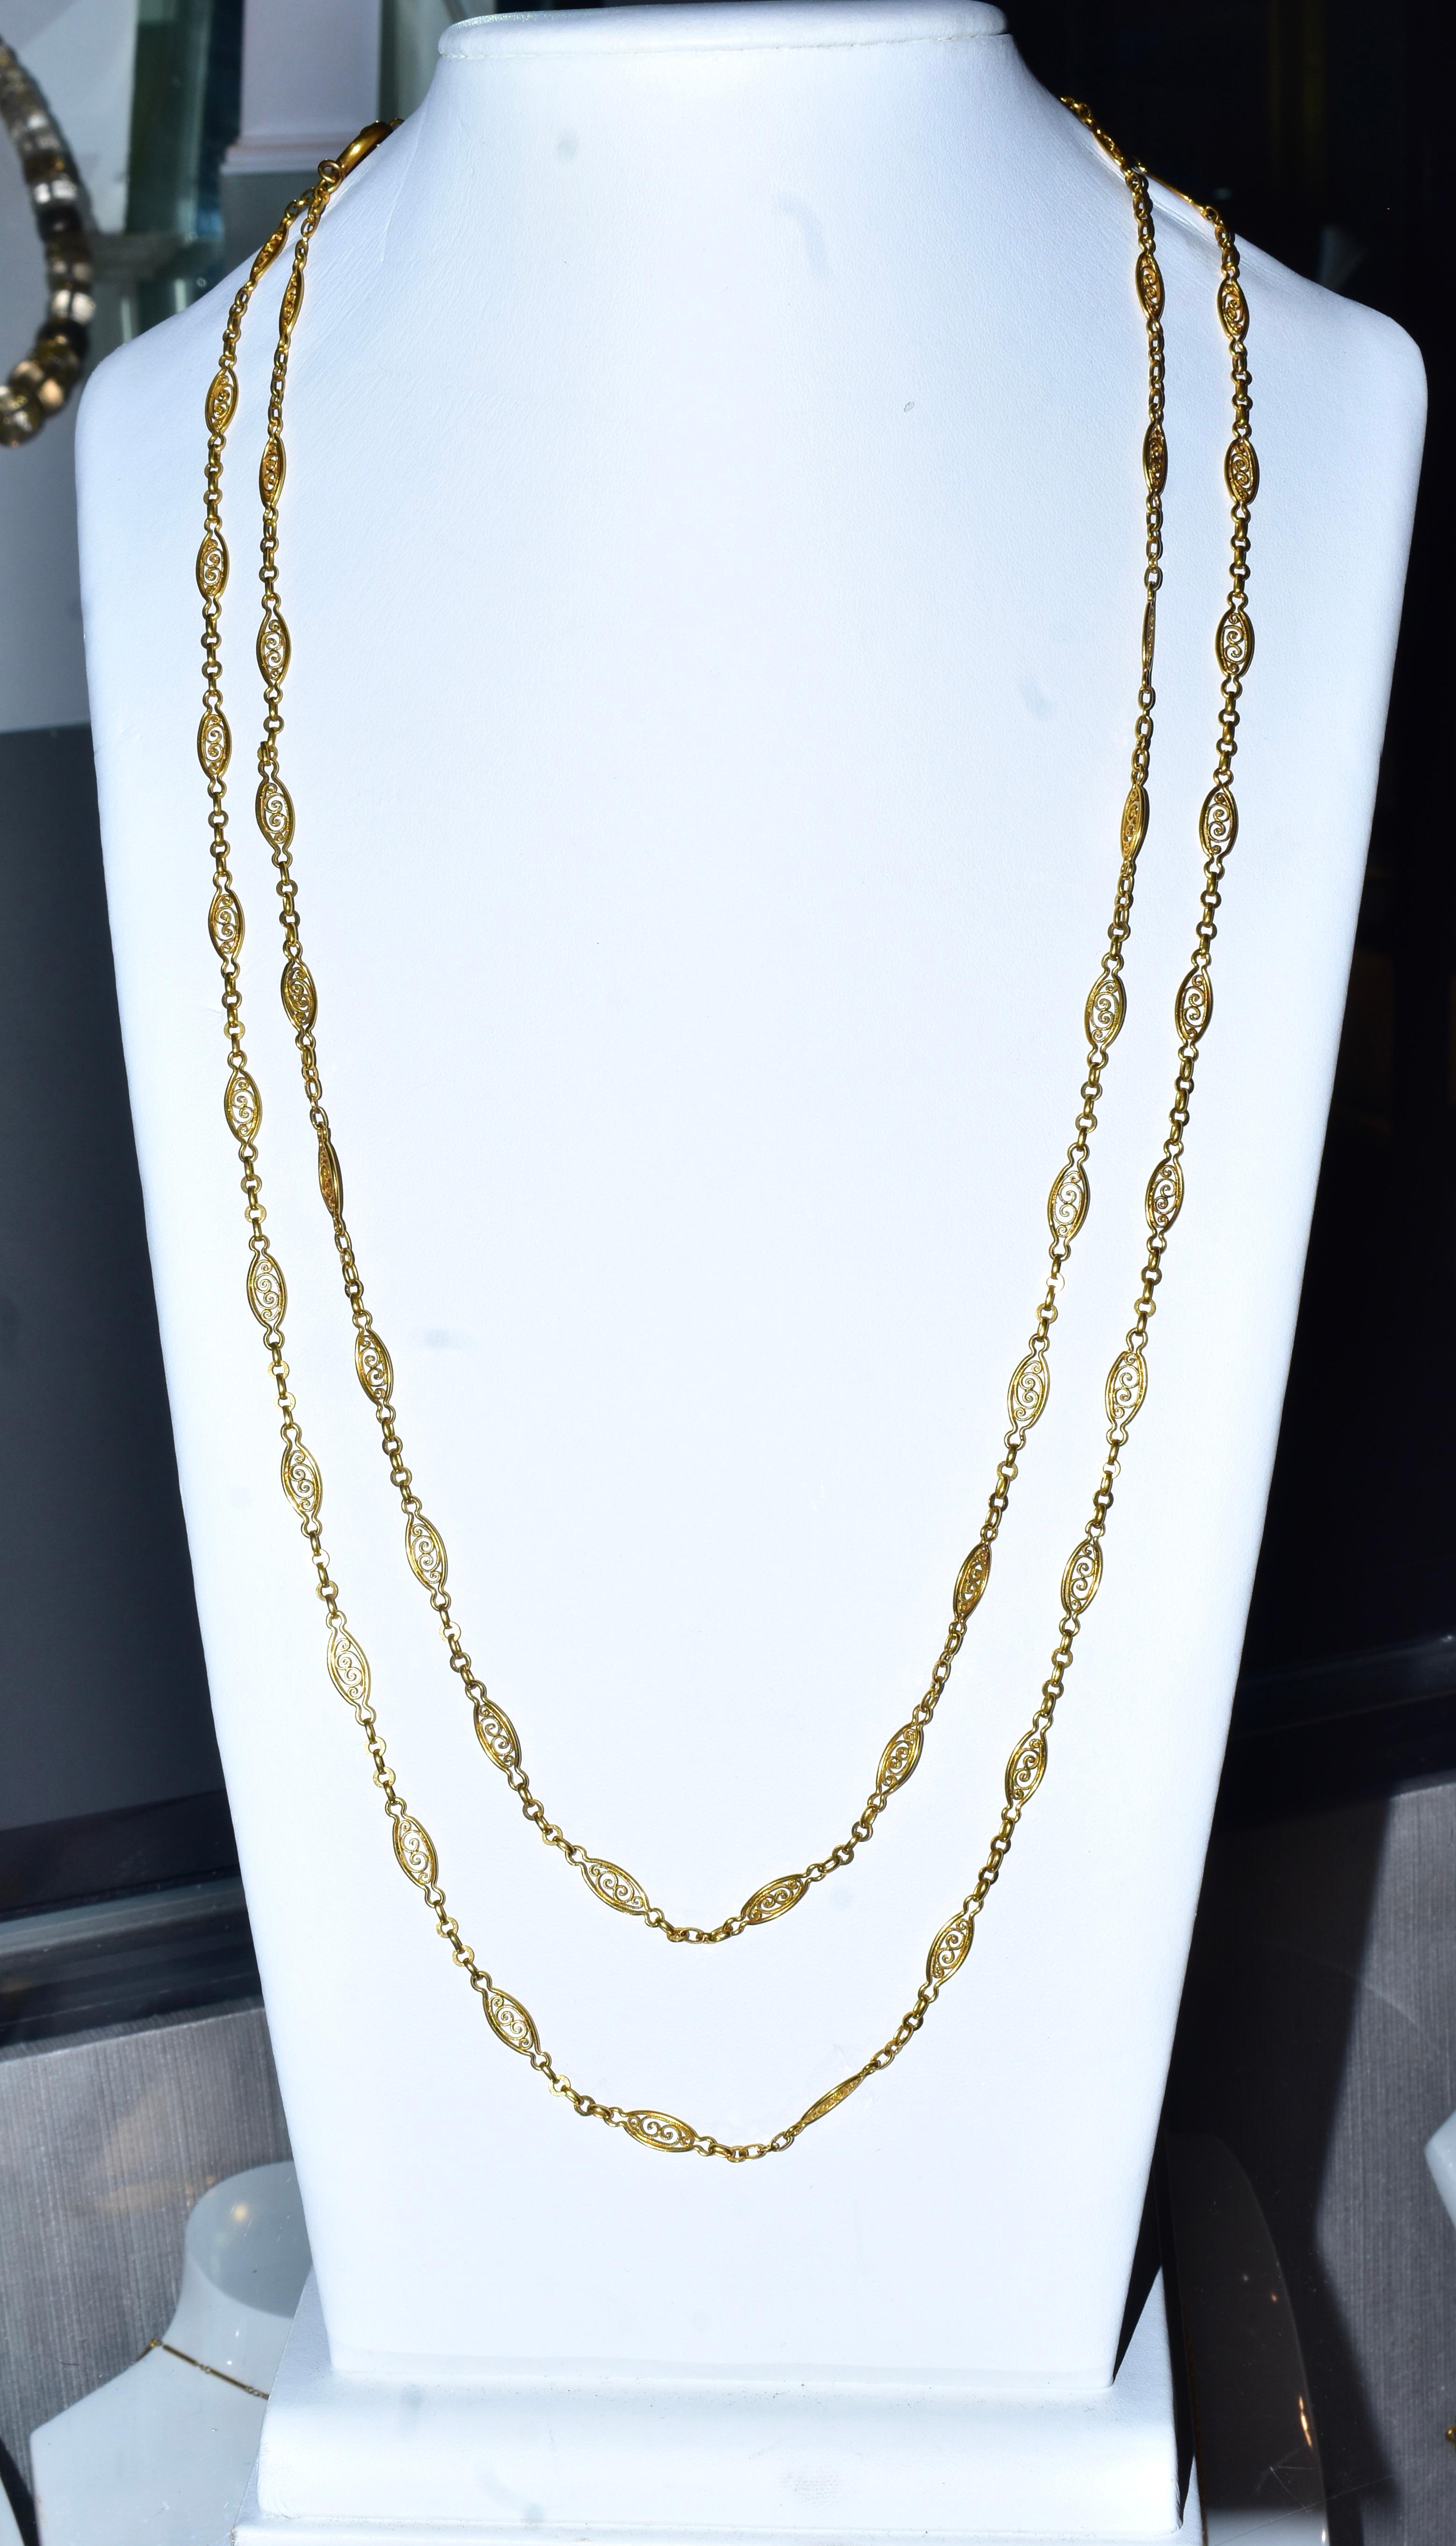 Women's or Men's Antique French 18K Gold 59.5 Inch Long Intricate Link Chain, c. 1900